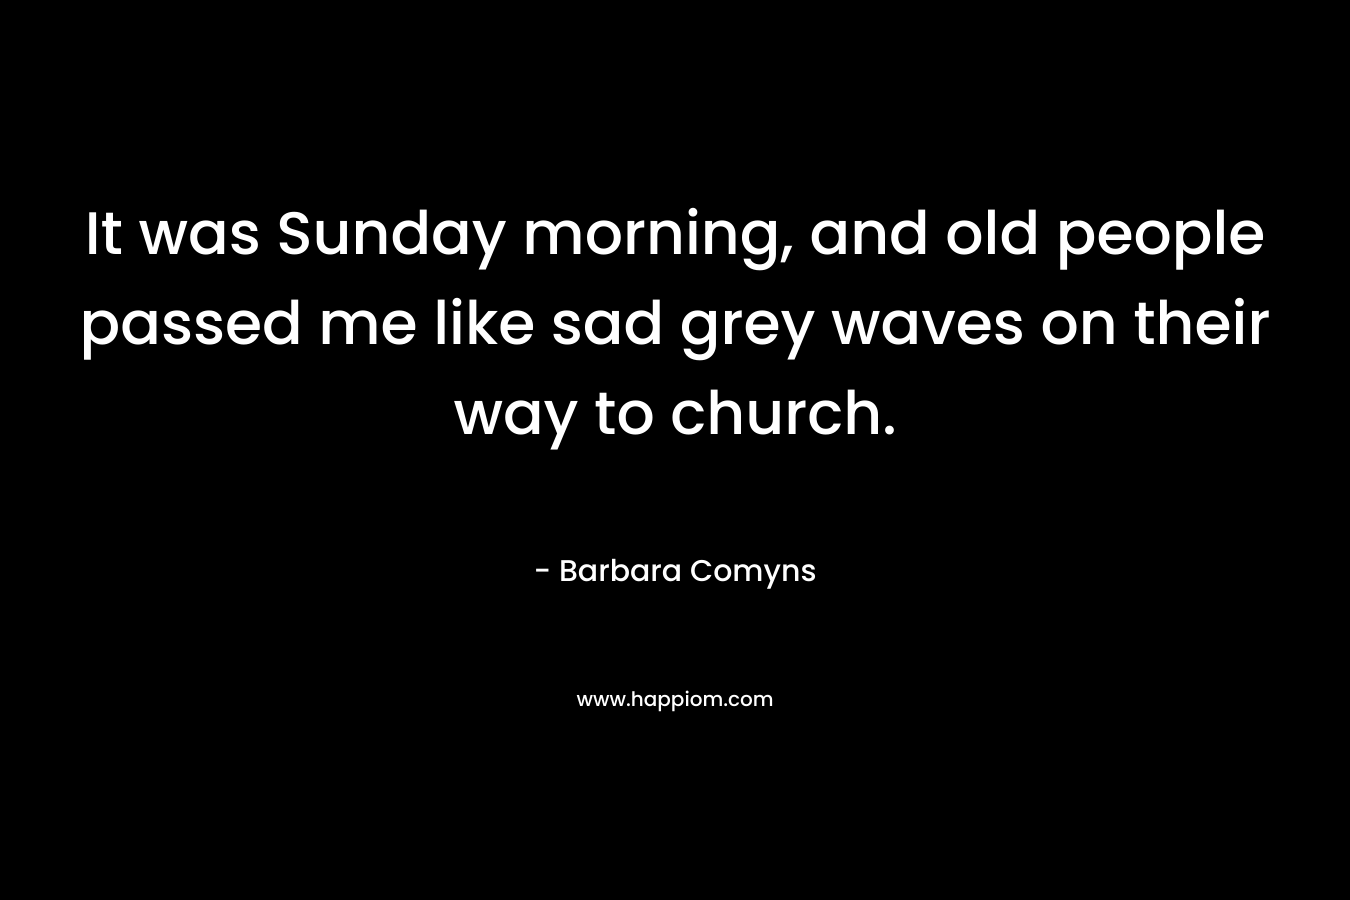 It was Sunday morning, and old people passed me like sad grey waves on their way to church.